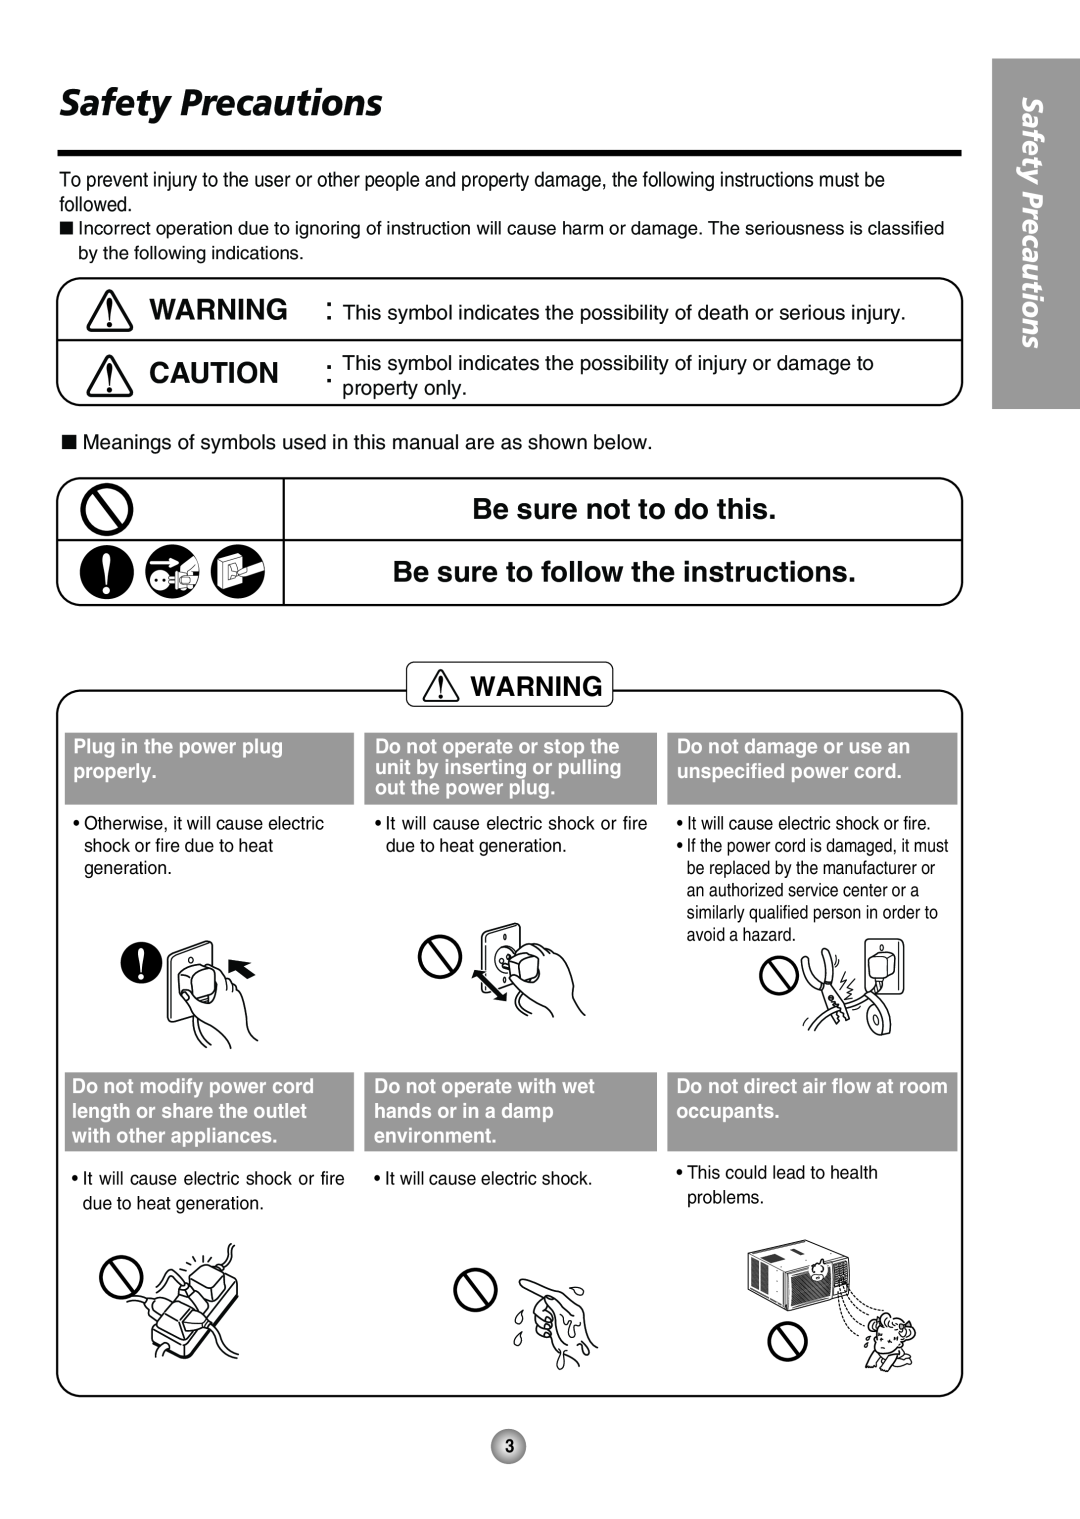 Panasonic CW-XC64HU Safety Precautions, Be sure not to do this, Be sure to follow the instructions, hands or in a damp 